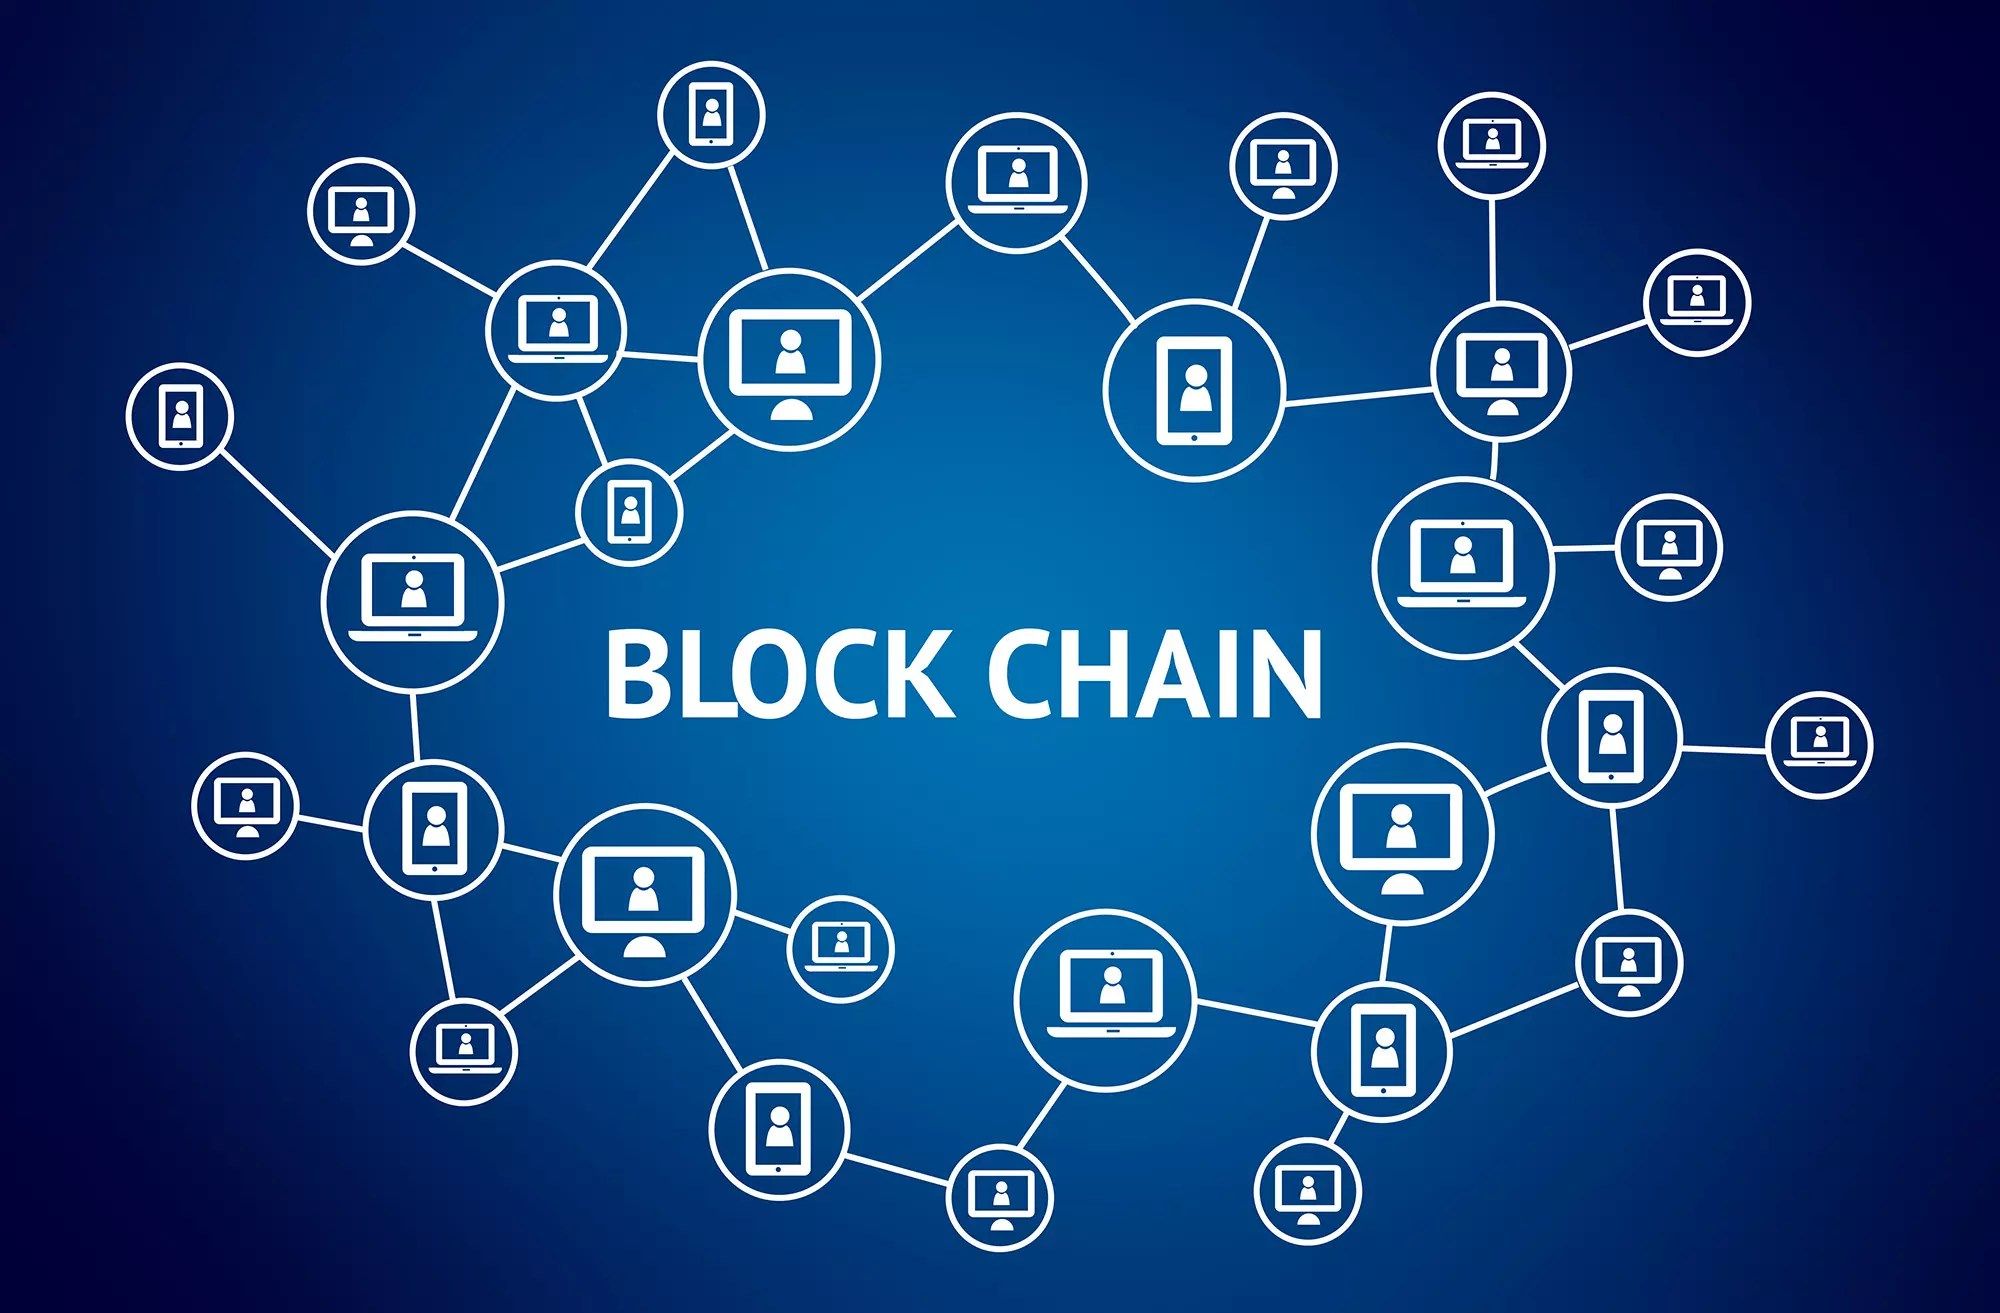 What is the Blockchain and Why is it So Important?